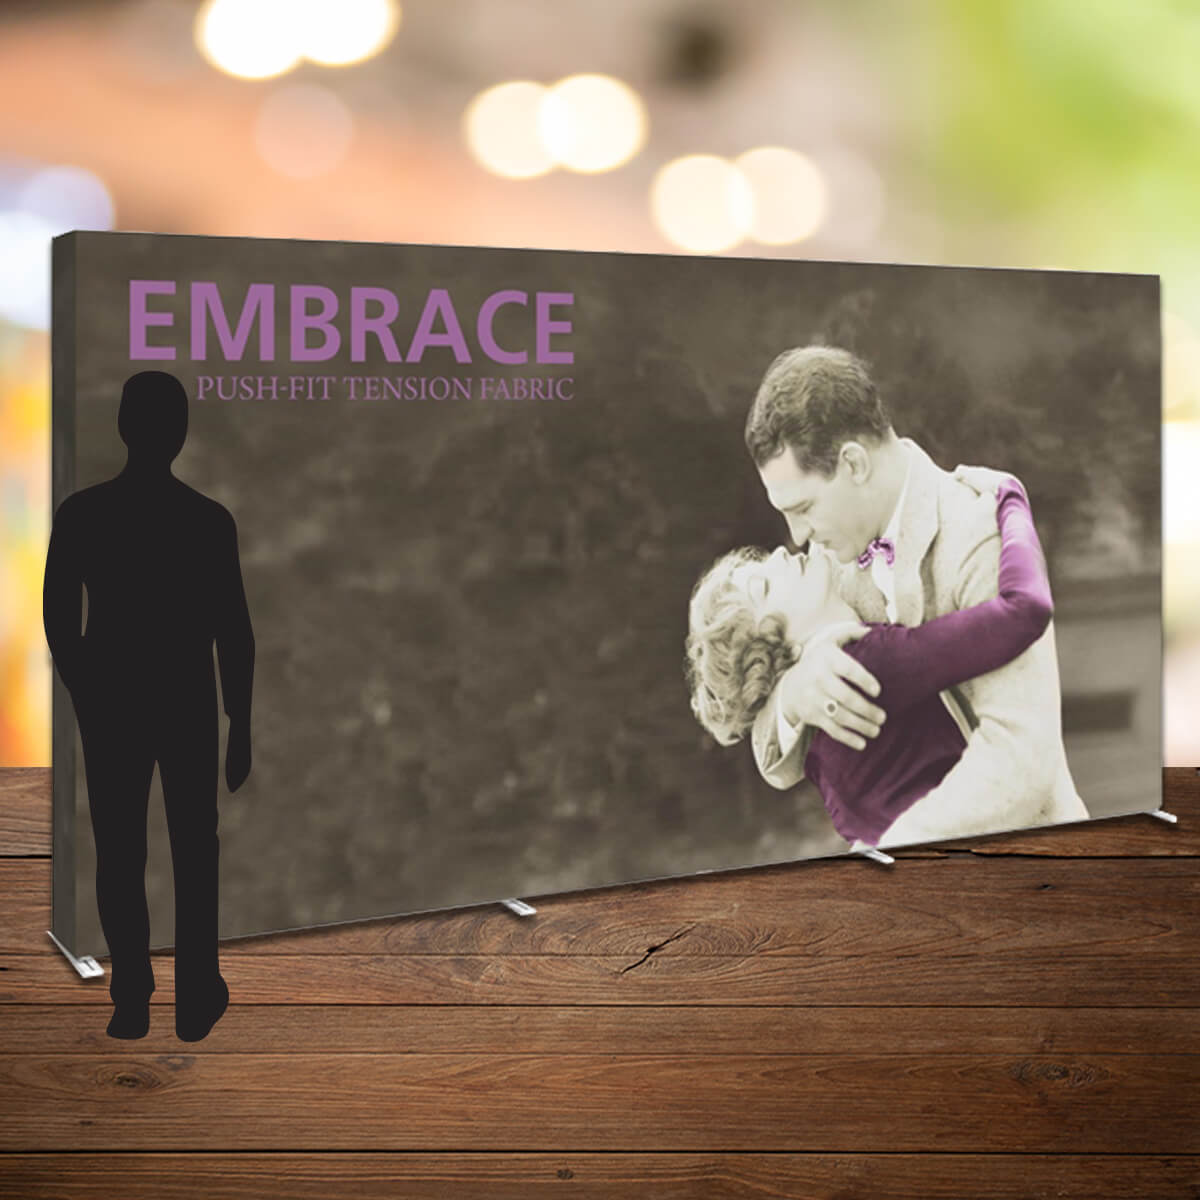 Embrace large velcro pop up display exhibit trade show by Curative Printing